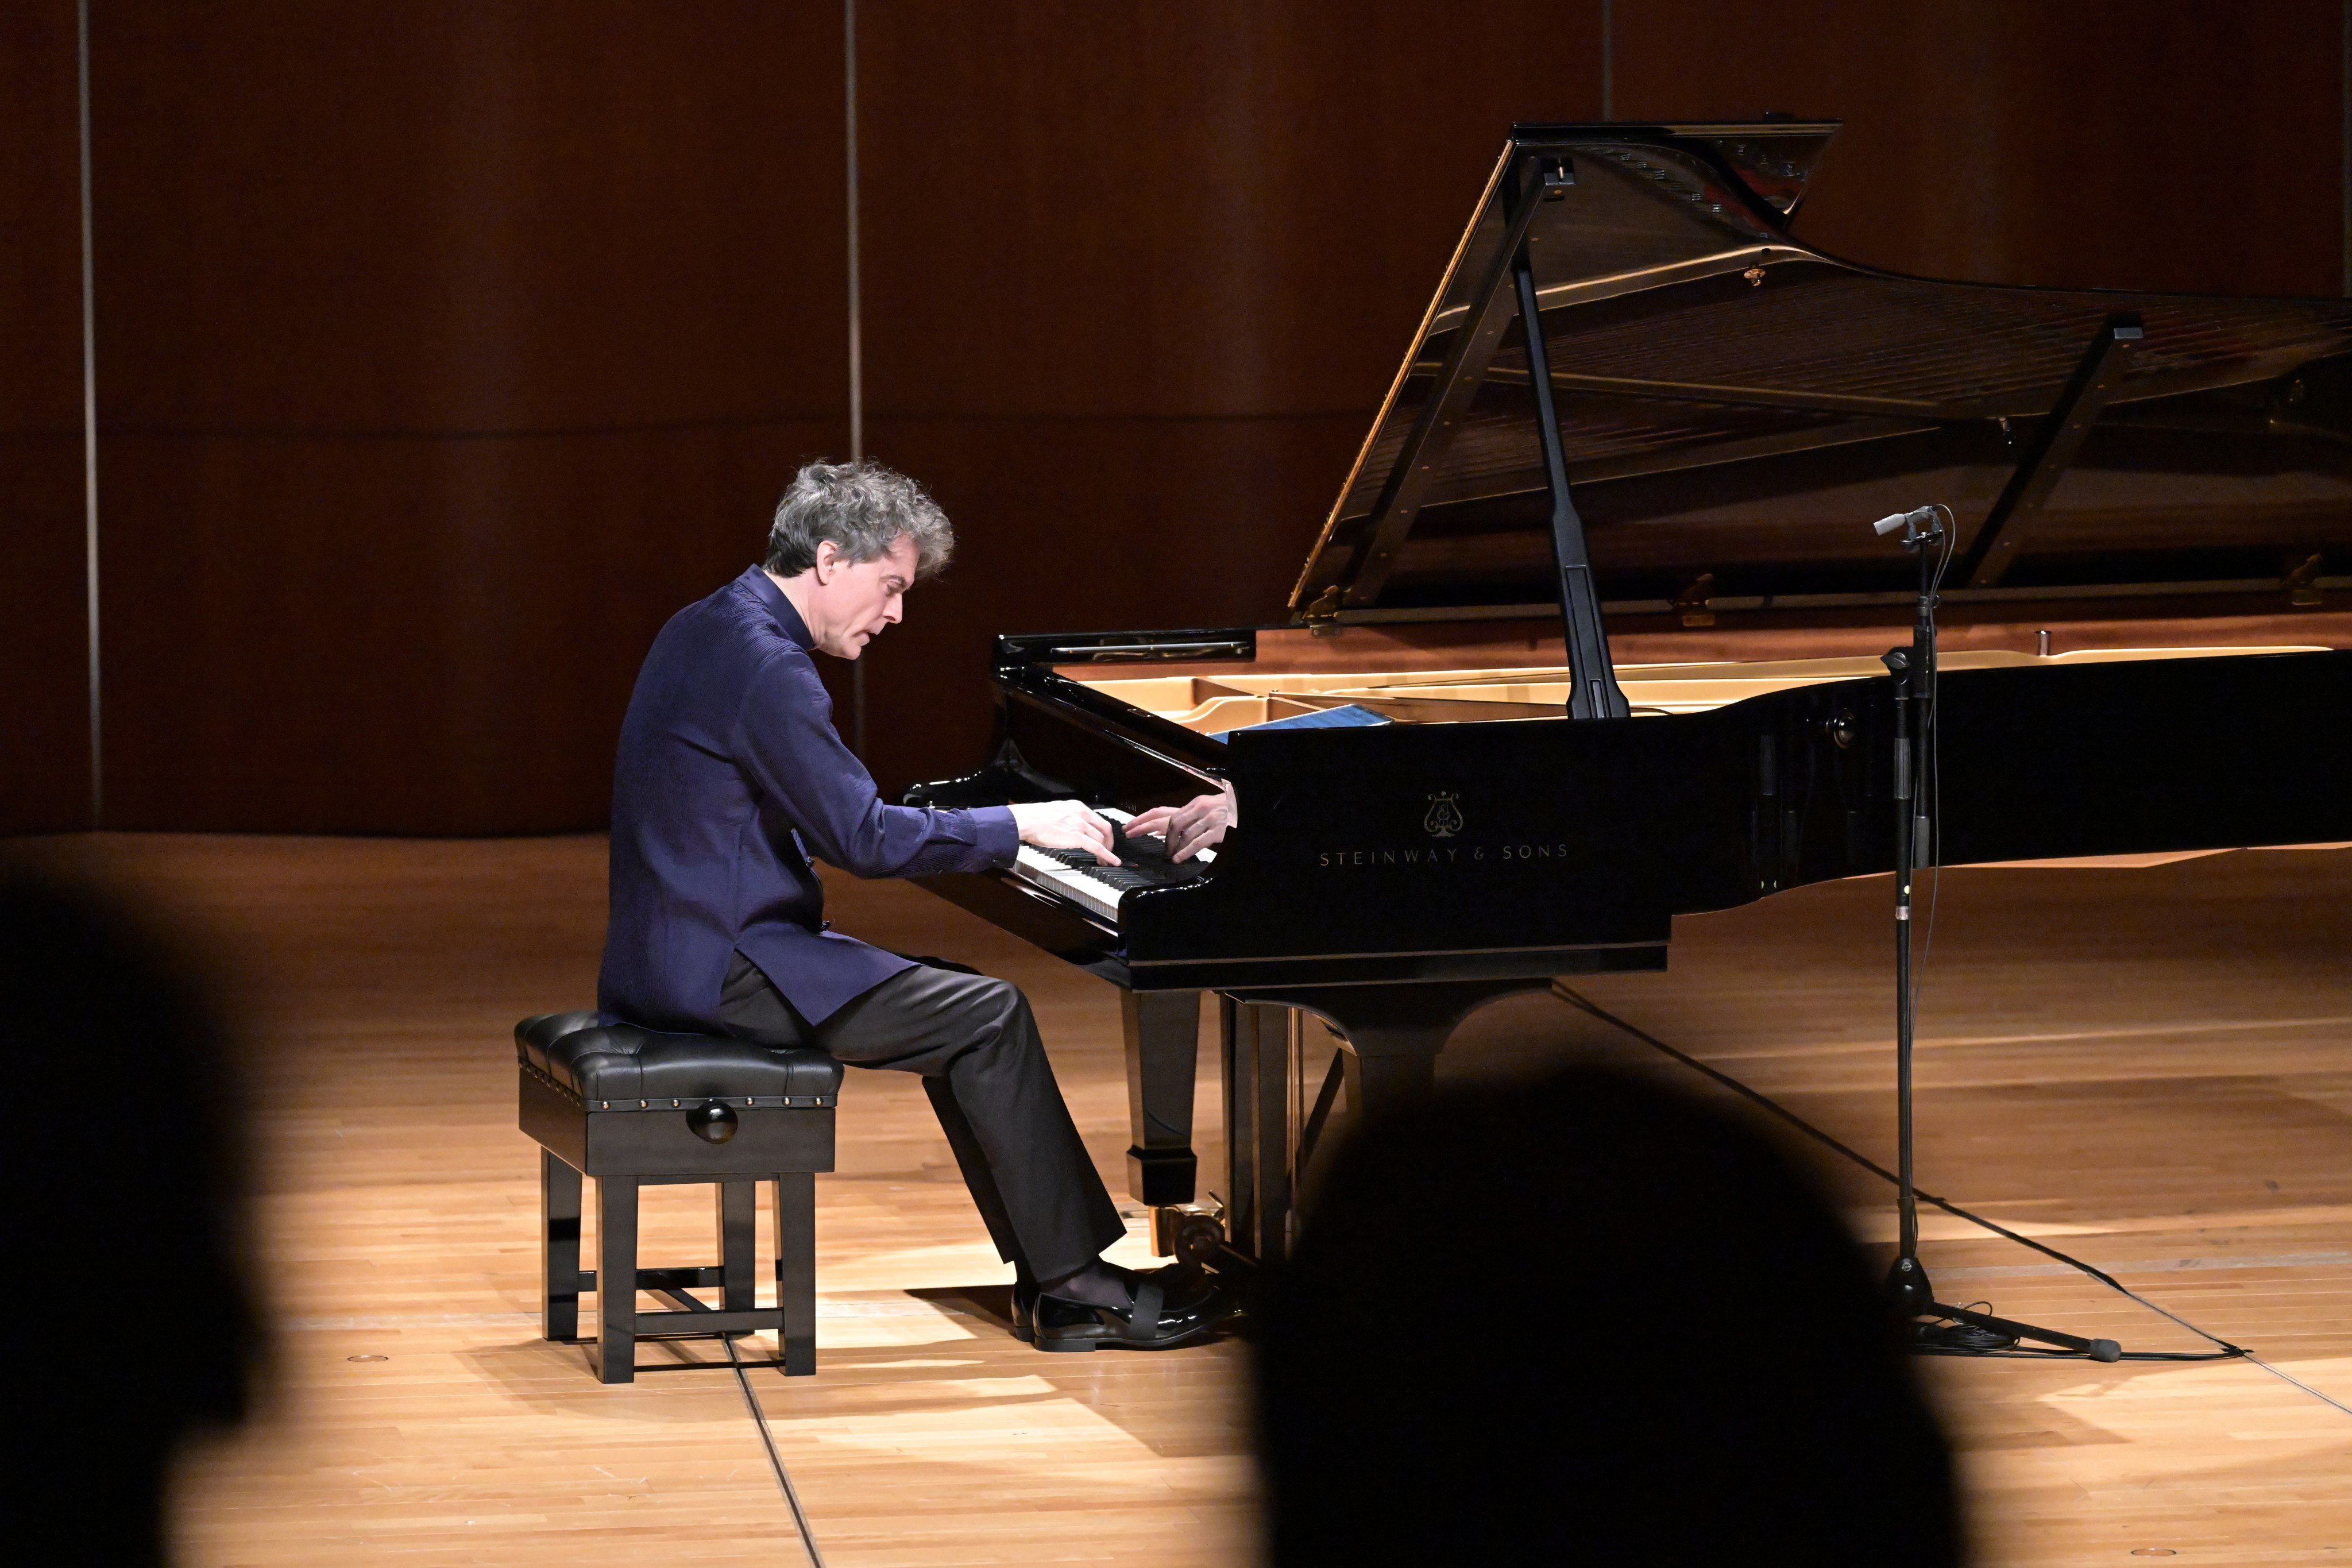 Pianist Paul Lewis performs during the fourth and final part of the “Schubert’s 12 Piano Sonatas with Paul Lewis” concert series at the Grand Hall, Lee Shau Kee Lecture Centre, University of Hong Kong on January 28, 2024. Photo: chungsum/HKU Muse